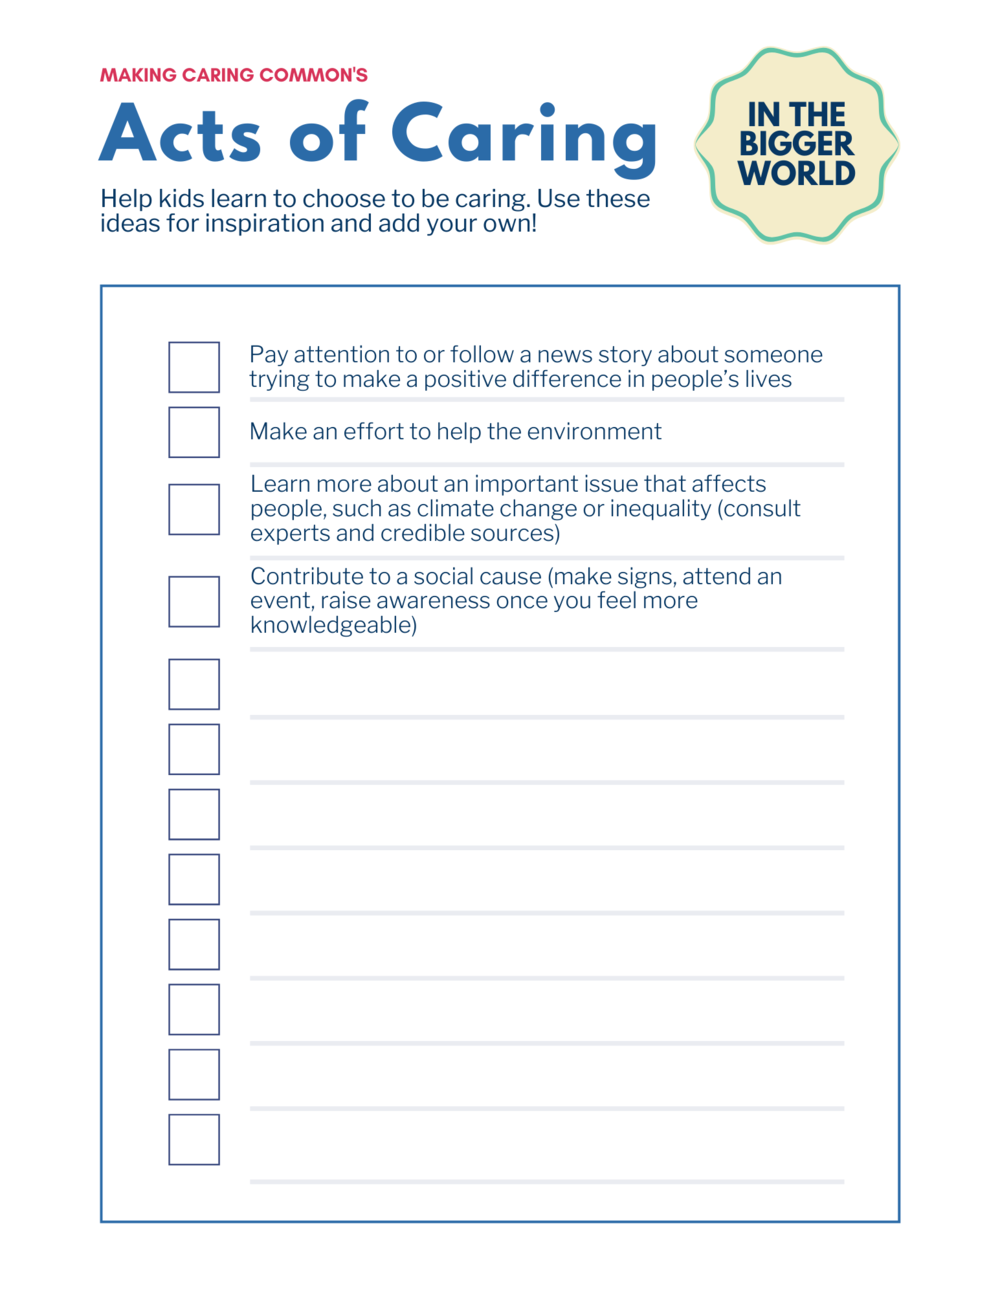 MCC Website-Empathy-3-acts-of-caring (3).png